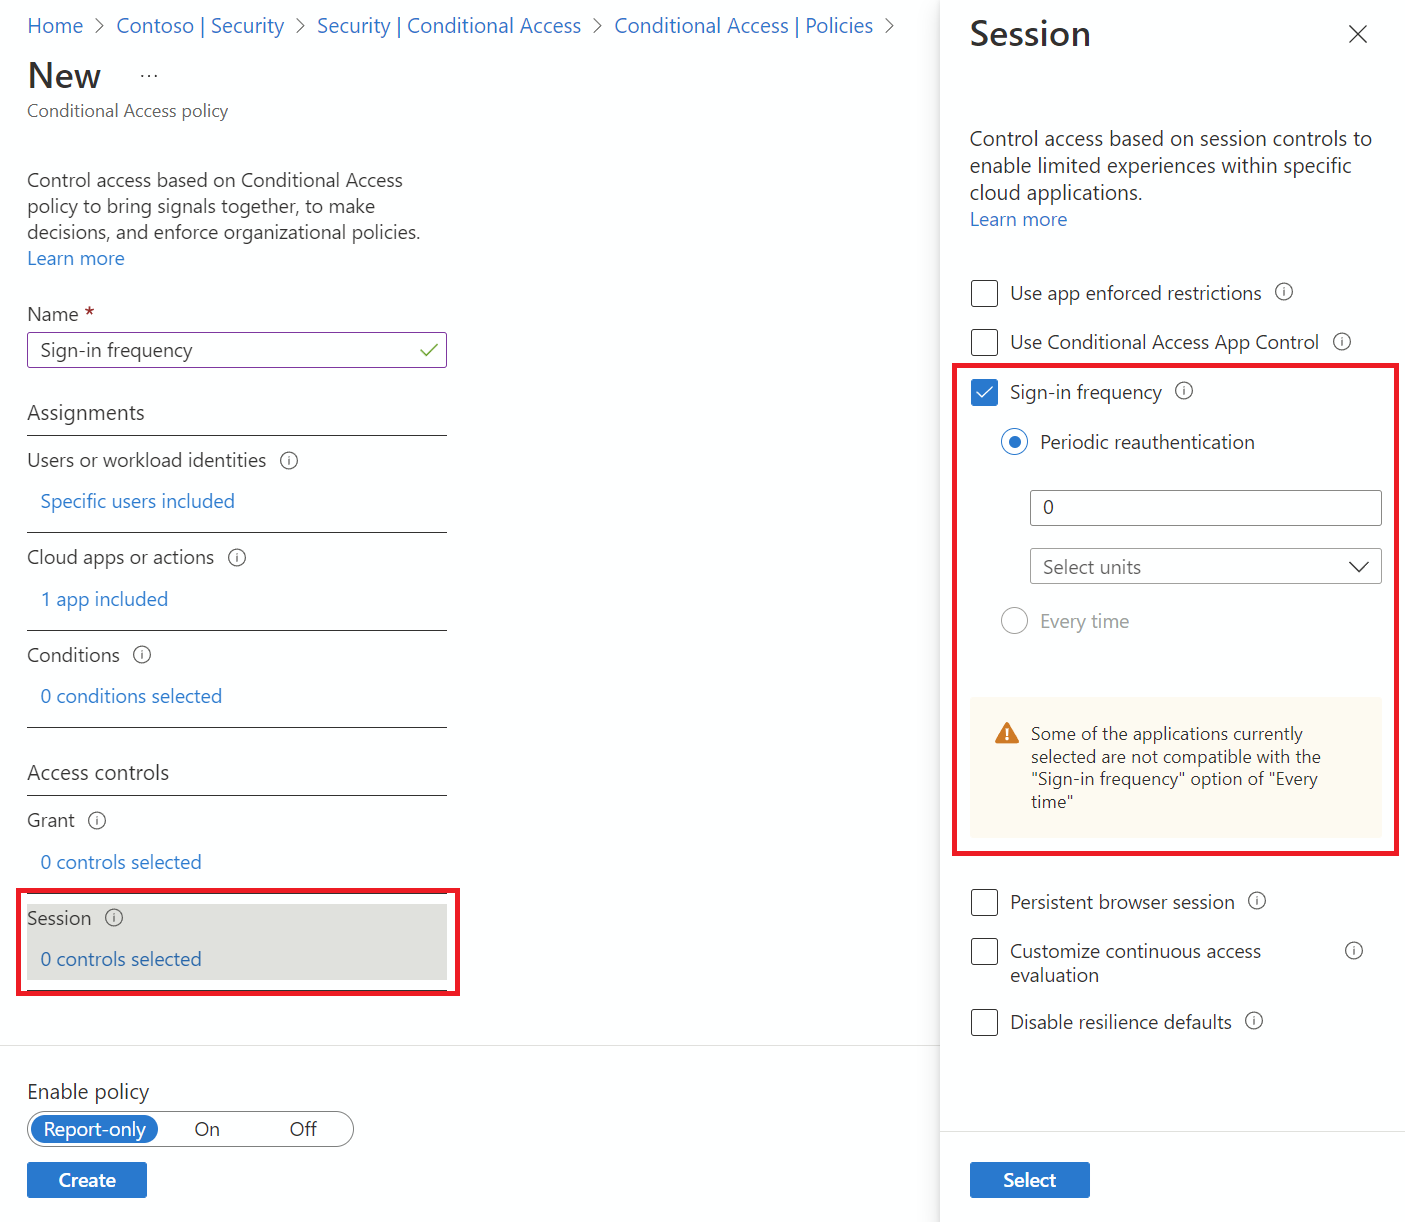 Conditional Access policy configured for sign-in frequency